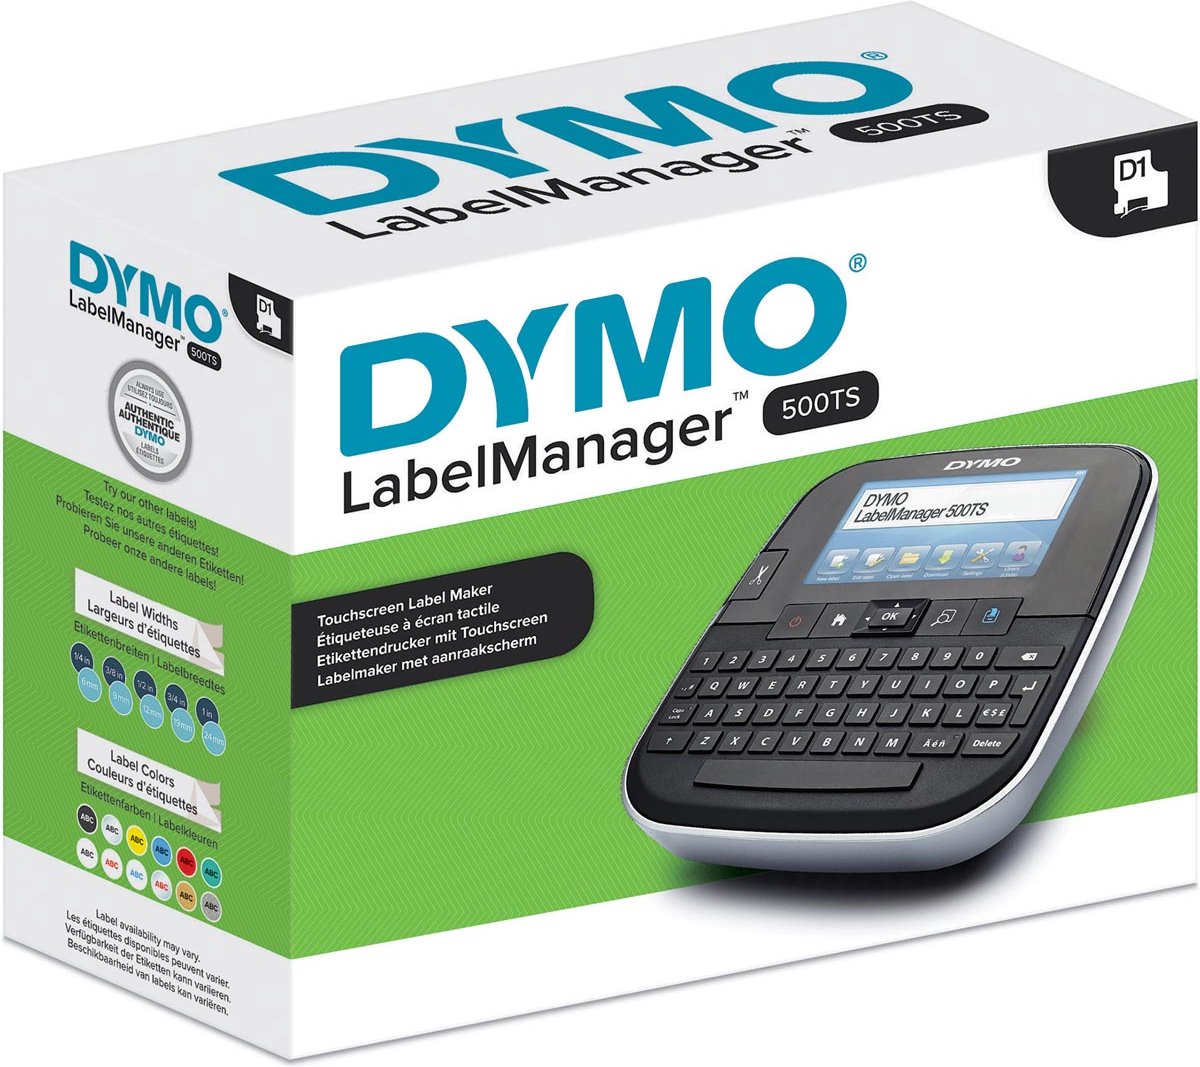 Dymo LabelManager © 500TS QWERTY UK